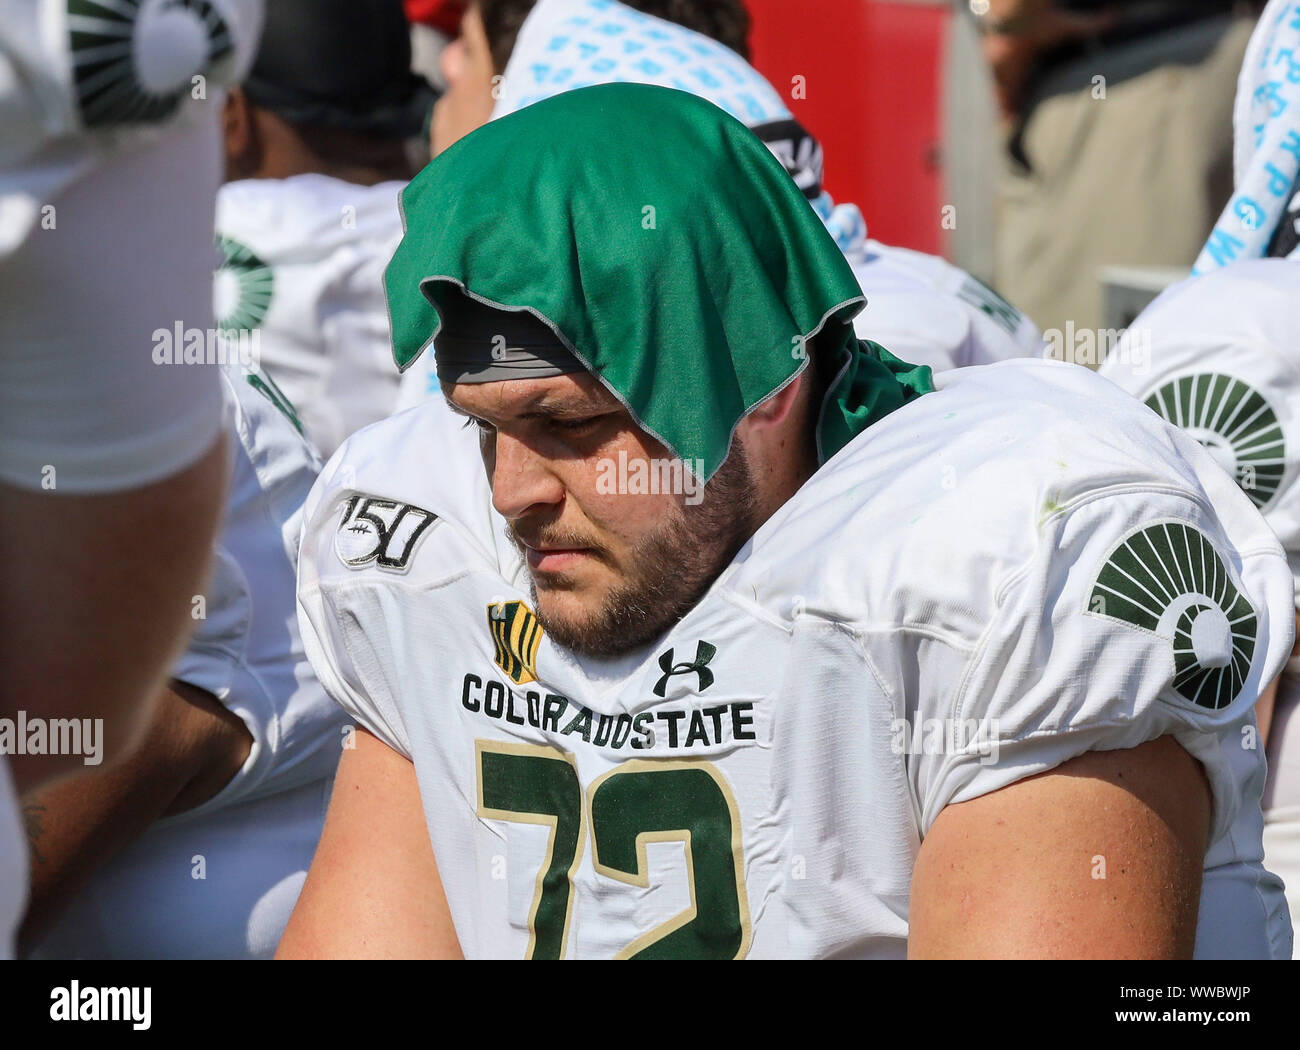 The Bench. 14th Sep, 2019. T.J. Storment #72 Colorado State offensive tackle rest with a wet towell on the bench. Arkansas defeated Colorado State 55-34 in Fayetteville, AR, Richey Miller/CSM/Alamy Live News Stock Photo